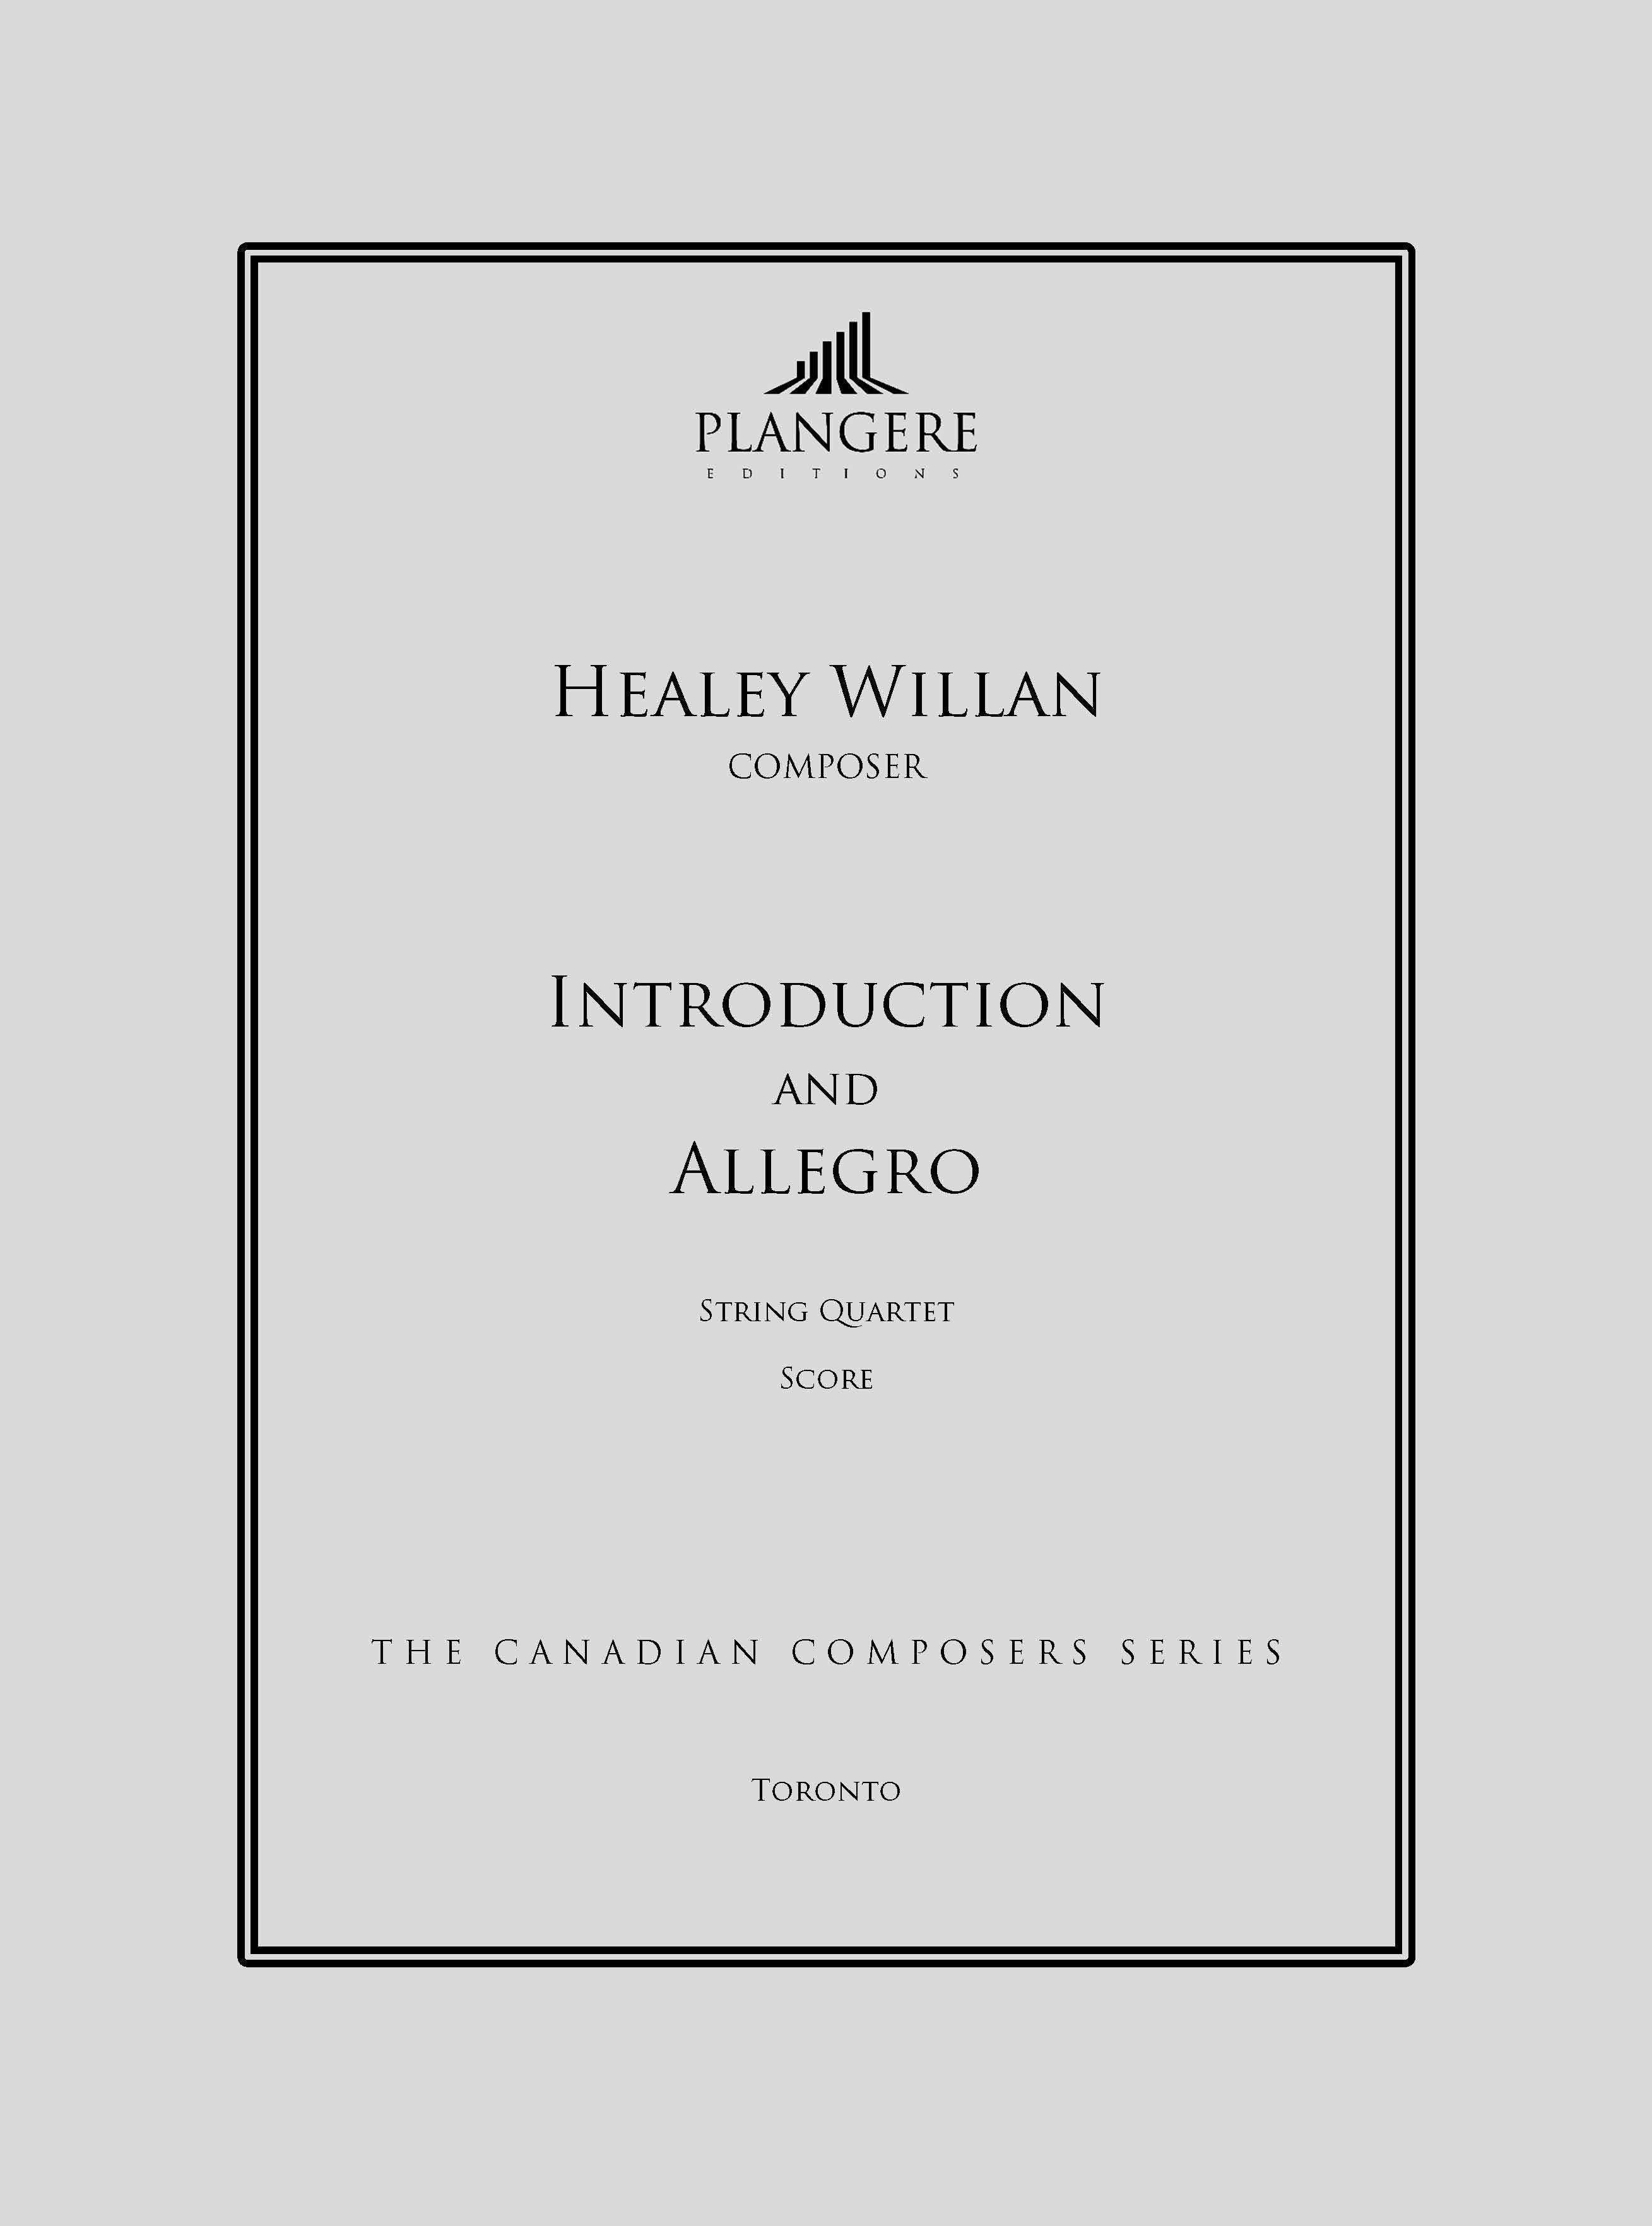 Introduction and Allegro for String Quartet - Score  (no parts)